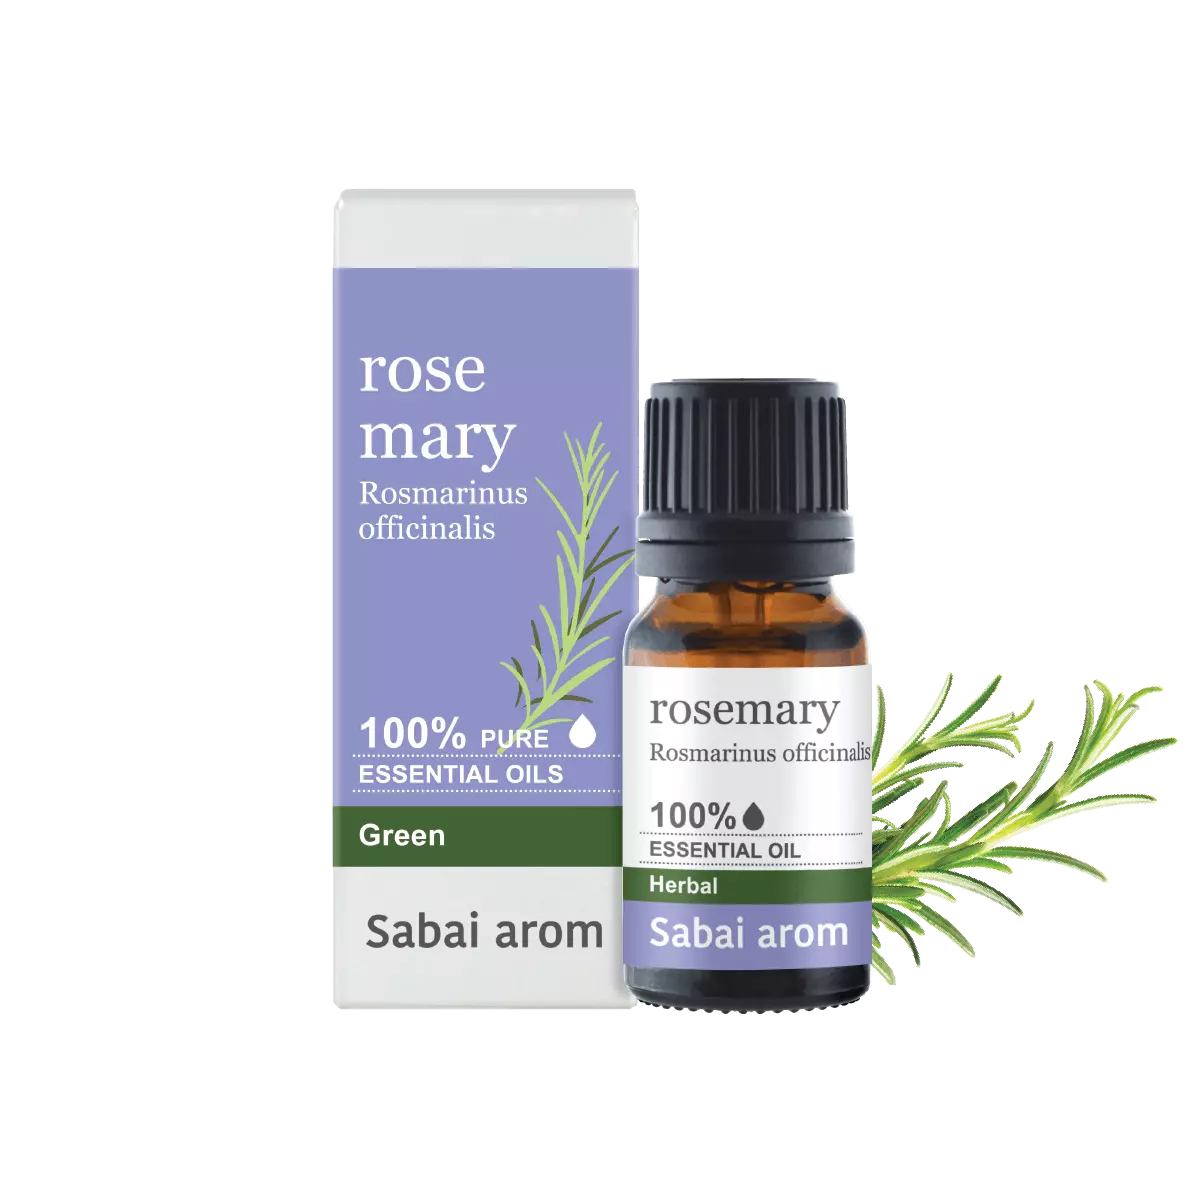 essential oil rosemary <h2>100% Pure Essential Oil</h2> <em><strong>Rosmarinus Officinalis Ct.verbenone</strong></em> <strong>Source : </strong>France In ancient Greek, Roman, Egyptian and Hebrew civilizations, Rosemary, a fragrant herb in the same family as Lavender and Sage, was bound to people in almost every aspect of life; from religion to festival, culinary and aromatherapy. It imparts a wonderful aroma of being pungent, camphorous, woody, refreshing and stimulating all in one. The sensorial effect of Rosemary strengthens our memory and supports our clear thinking. Thus, it is the right essential oil that can be used as a student buddy. When mixed with carrier oil and applied topically, Rosemary essential oil relieves our abdominal pain effectively. <strong>Scent : </strong>Strong penetrating, fresh, medicinal, herbal and slight sweet. <strong>Family : </strong>Fresh Herb <strong>Note : </strong>Middle